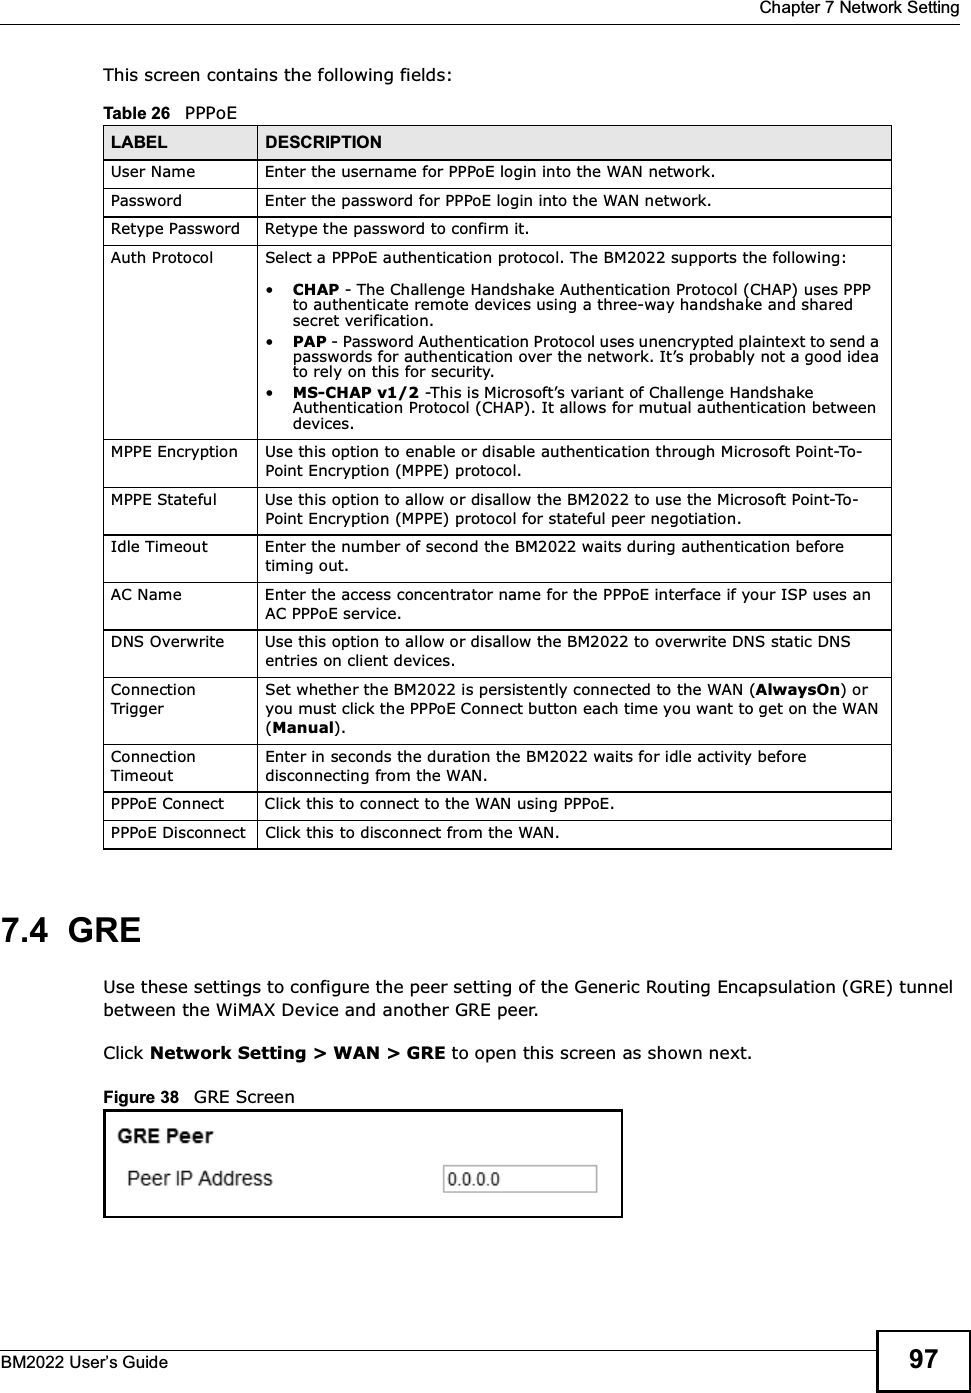  Chapter 7 Network SettingBM2022 Users Guide 97This screen contains the following fields:7.4  GREUse these settings to configure the peer setting of the Generic Routing Encapsulation (GRE) tunnel between the WiMAX Device and another GRE peer.Click Network Setting &gt; WAN &gt; GRE to open this screen as shown next.Figure 38   GRE ScreenTable 26   PPPoELABEL DESCRIPTIONUser Name Enter the username for PPPoE login into the WAN network.Password Enter the password for PPPoE login into the WAN network.Retype Password Retype the password to confirm it.Auth Protocol Select a PPPoE authentication protocol. The BM2022 supports the following:CHAP - The Challenge Handshake Authentication Protocol (CHAP) uses PPP to authenticate remote devices using a three-way handshake and shared secret verification.PAP - Password Authentication Protocol uses unencrypted plaintext to send a passwords for authentication over the network. Its probably not a good idea to rely on this for security.MS-CHAP v1/2 -This is Microsofts variant of Challenge Handshake Authentication Protocol (CHAP). It allows for mutual authentication between devices.MPPE Encryption Use this option to enable or disable authentication through Microsoft Point-To-Point Encryption (MPPE) protocol.MPPE Stateful Use this option to allow or disallow the BM2022 to use the Microsoft Point-To-Point Encryption (MPPE) protocol for stateful peer negotiation.Idle Timeout Enter the number of second the BM2022 waits during authentication before timing out.AC Name Enter the access concentrator name for the PPPoE interface if your ISP uses an AC PPPoE service.DNS Overwrite Use this option to allow or disallow the BM2022 to overwrite DNS static DNS entries on client devices.Connection TriggerSet whether the BM2022 is persistently connected to the WAN (AlwaysOn) or you must click the PPPoE Connect button each time you want to get on the WAN (Manual).Connection TimeoutEnter in seconds the duration the BM2022 waits for idle activity before disconnecting from the WAN.PPPoE Connect Click this to connect to the WAN using PPPoE.PPPoE Disconnect Click this to disconnect from the WAN.